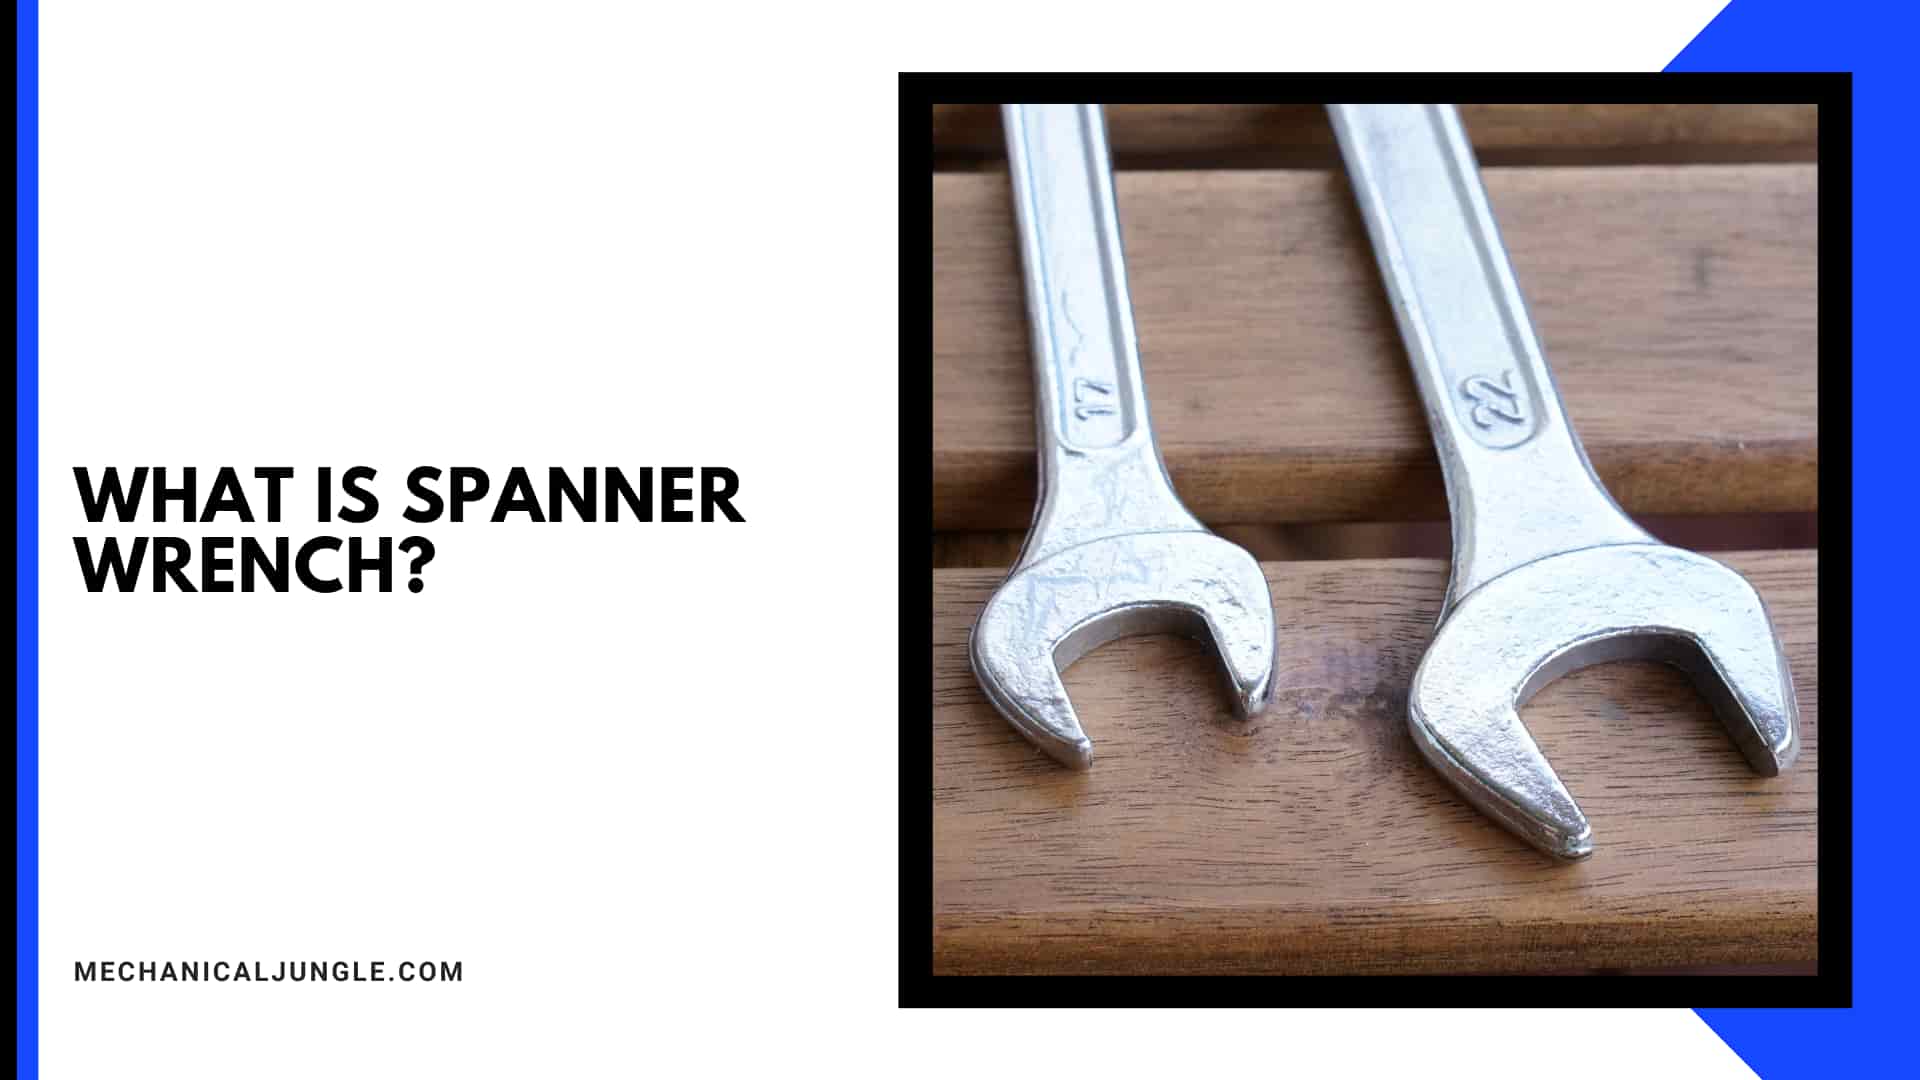 What Is Spanner Wrench?